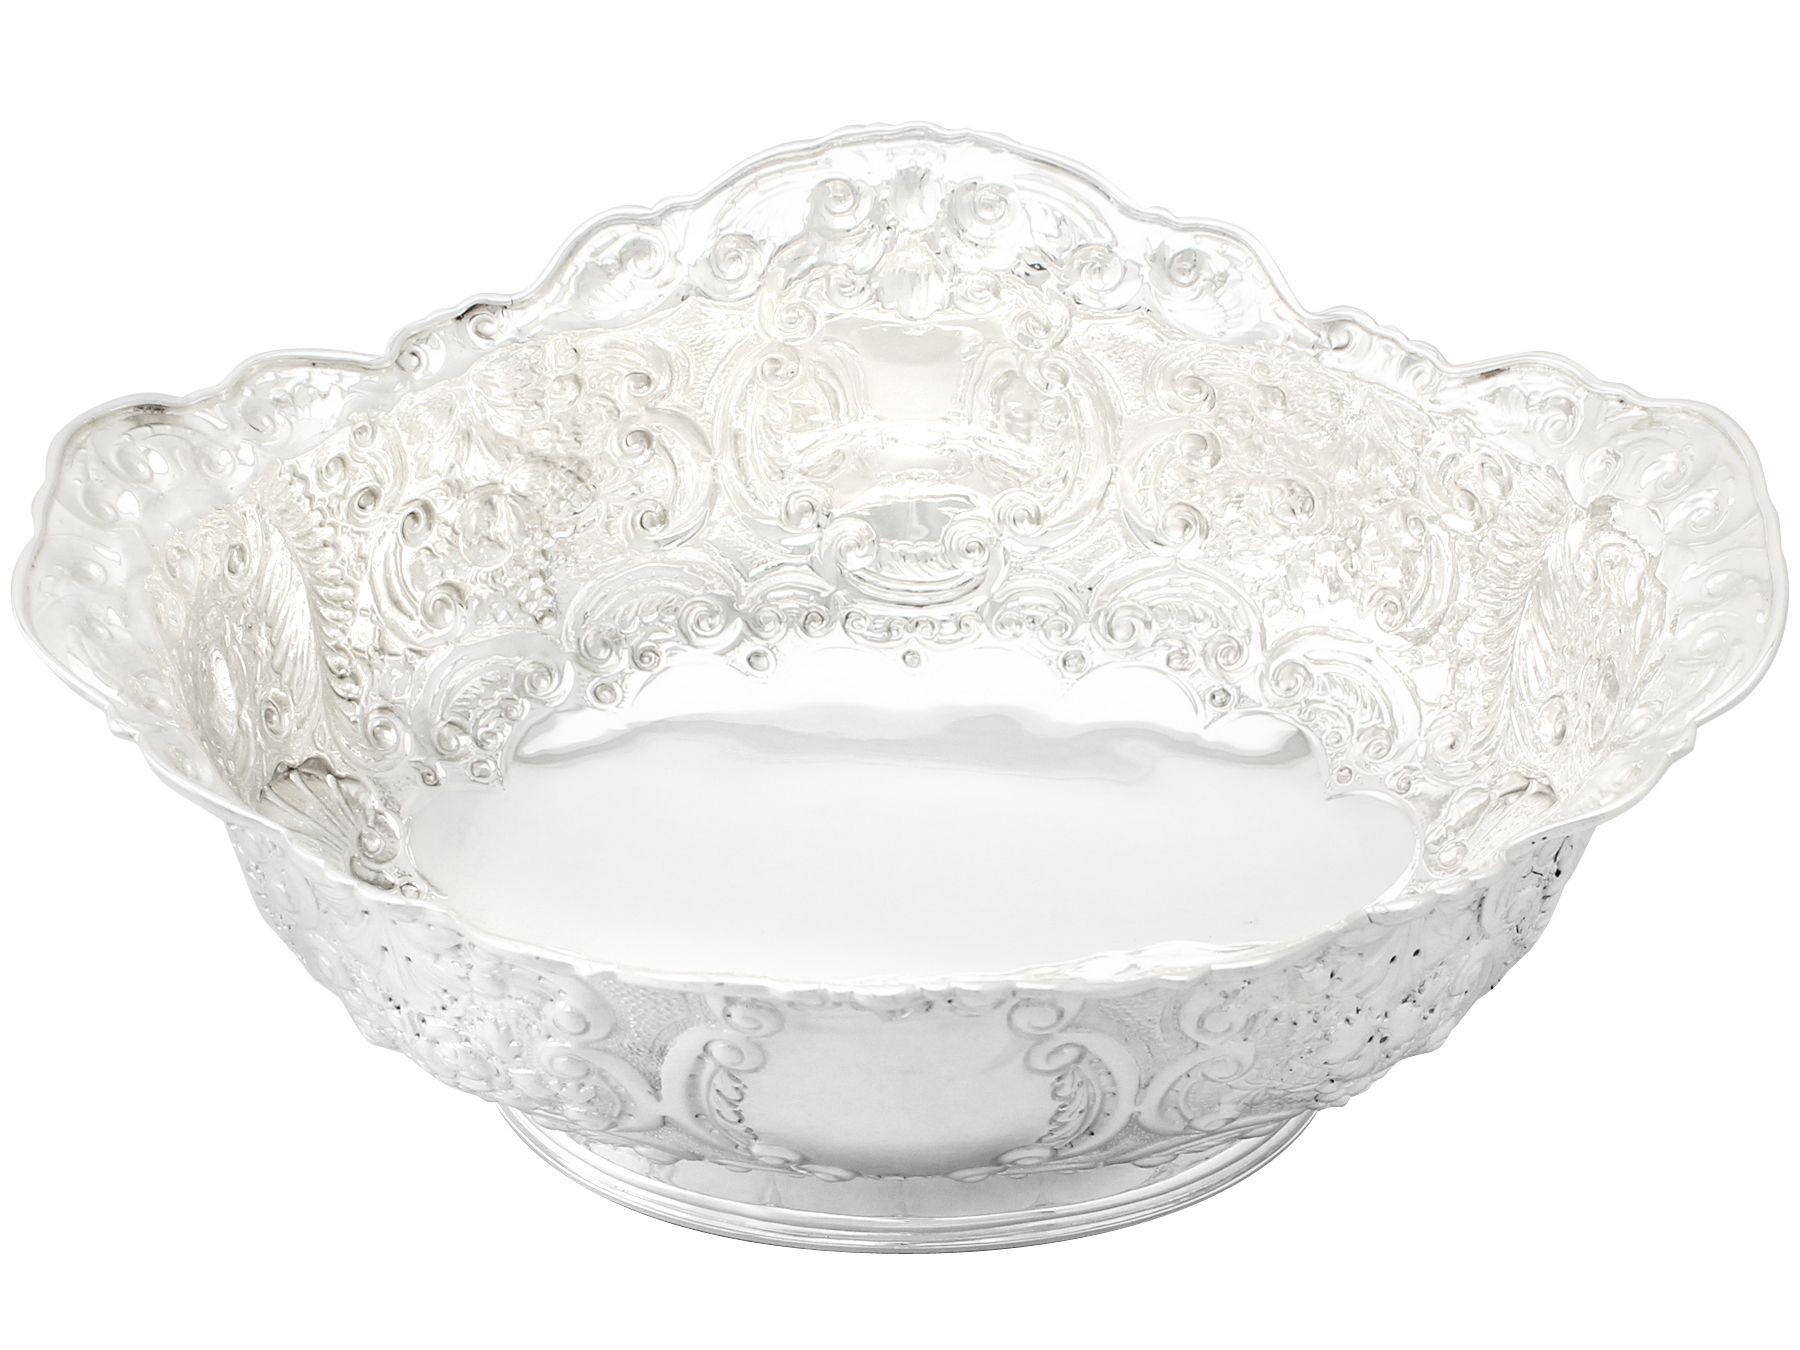 A fine antique Victorian sterling silver presentation bowl; part of our presentation silverware collection

This fine antique sterling silver bowl has an oval spreading form onto a plain oval foot.

The body of this Victorian bowl is embellished